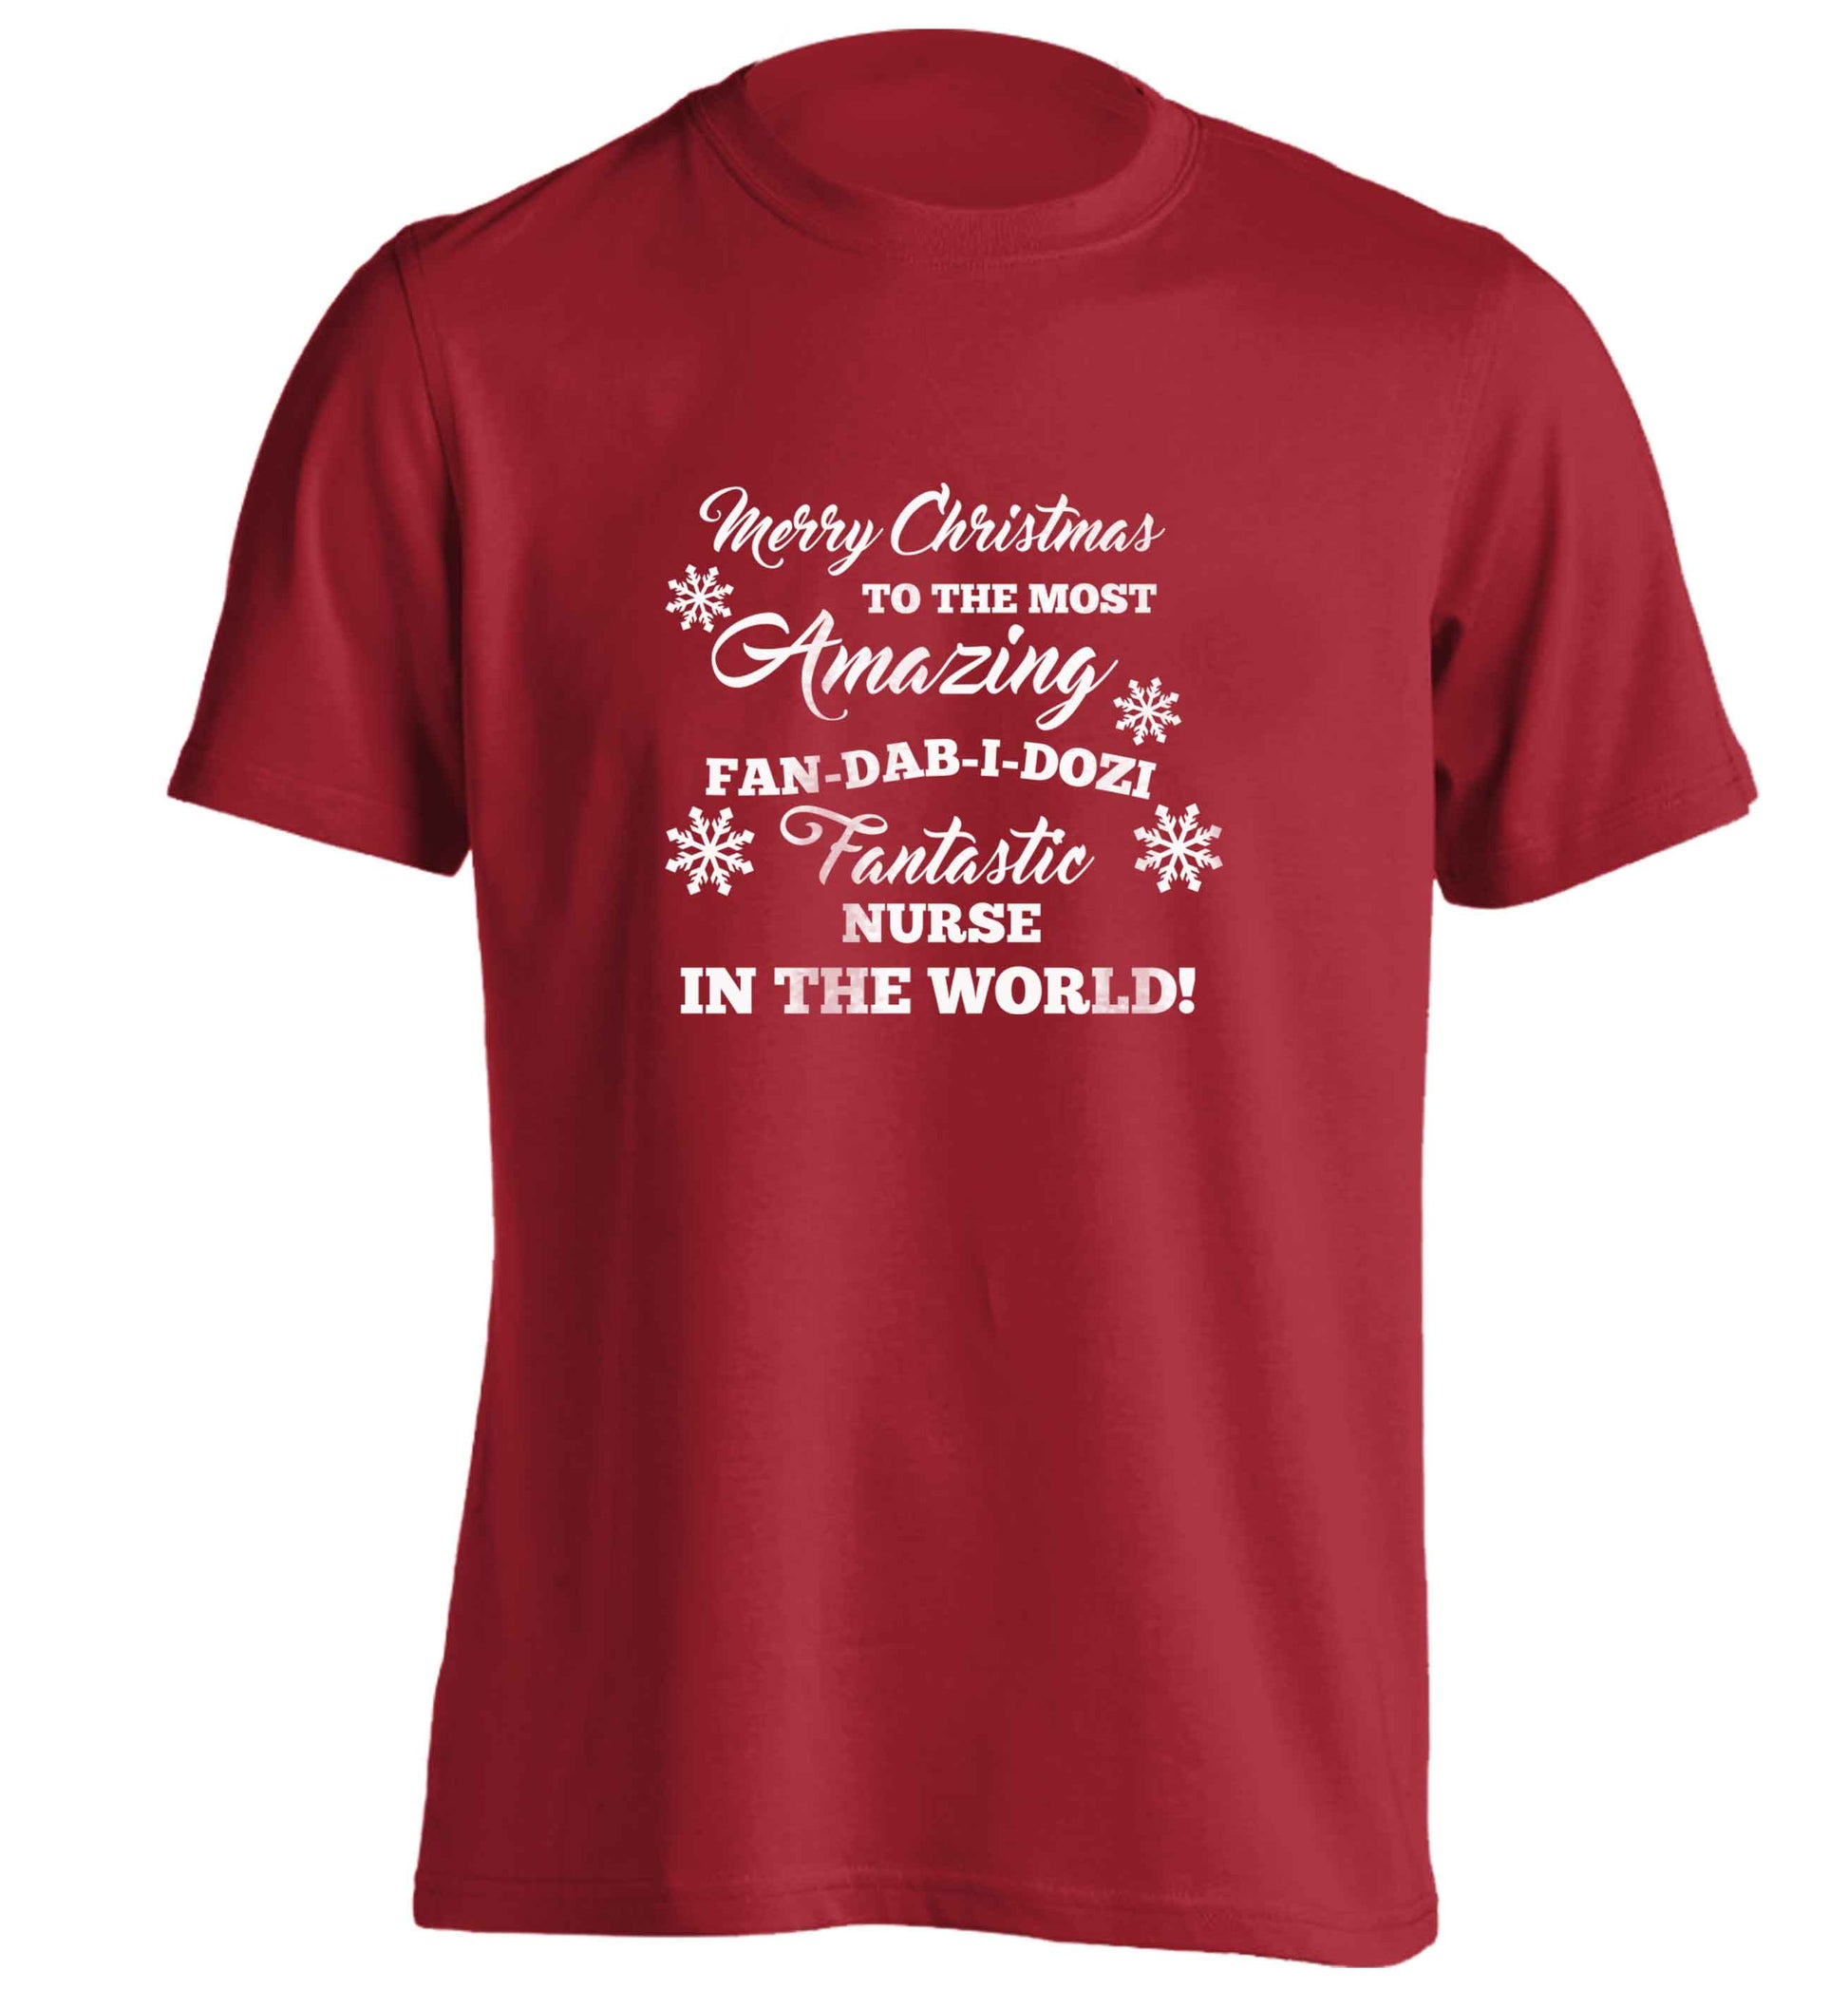 Merry Christmas to the most amazing nurse in the world! adults unisex red Tshirt 2XL